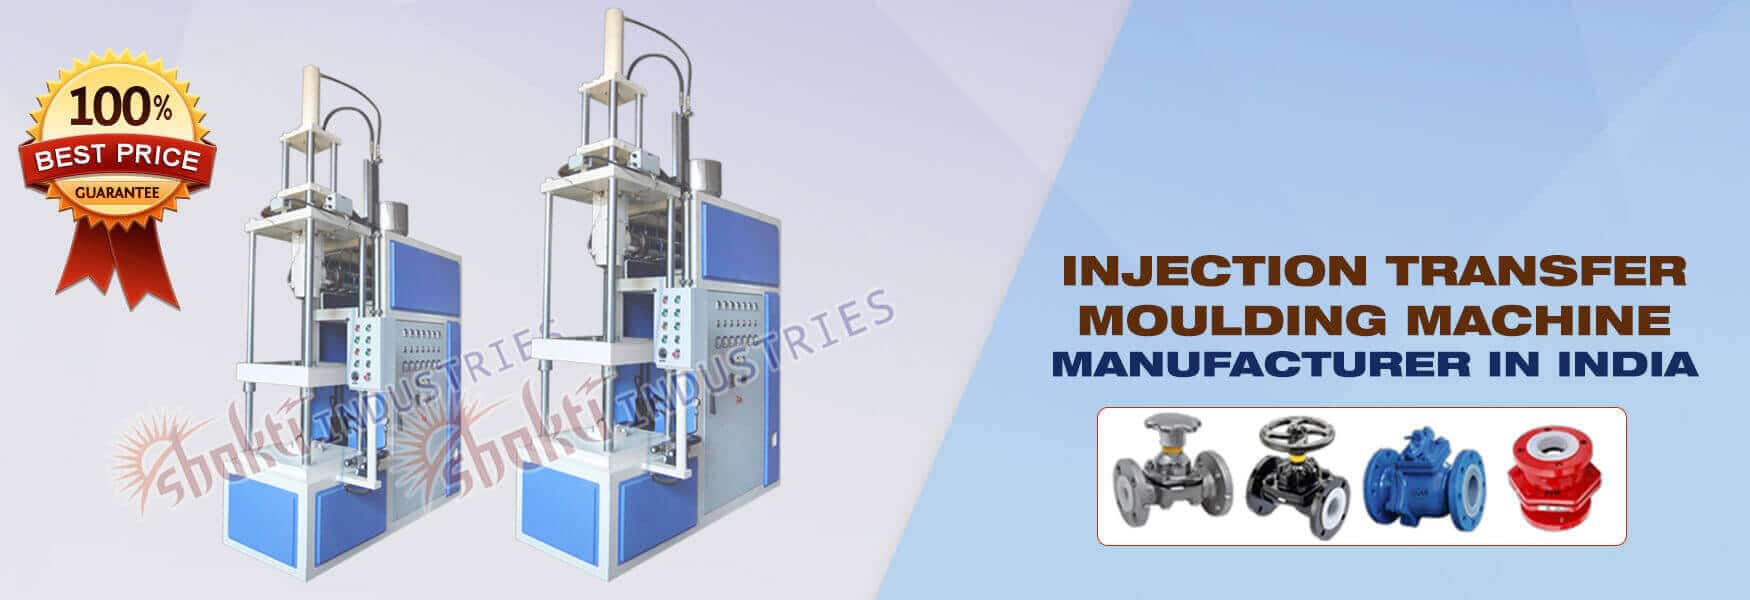 injection-transfer-moulding-machine